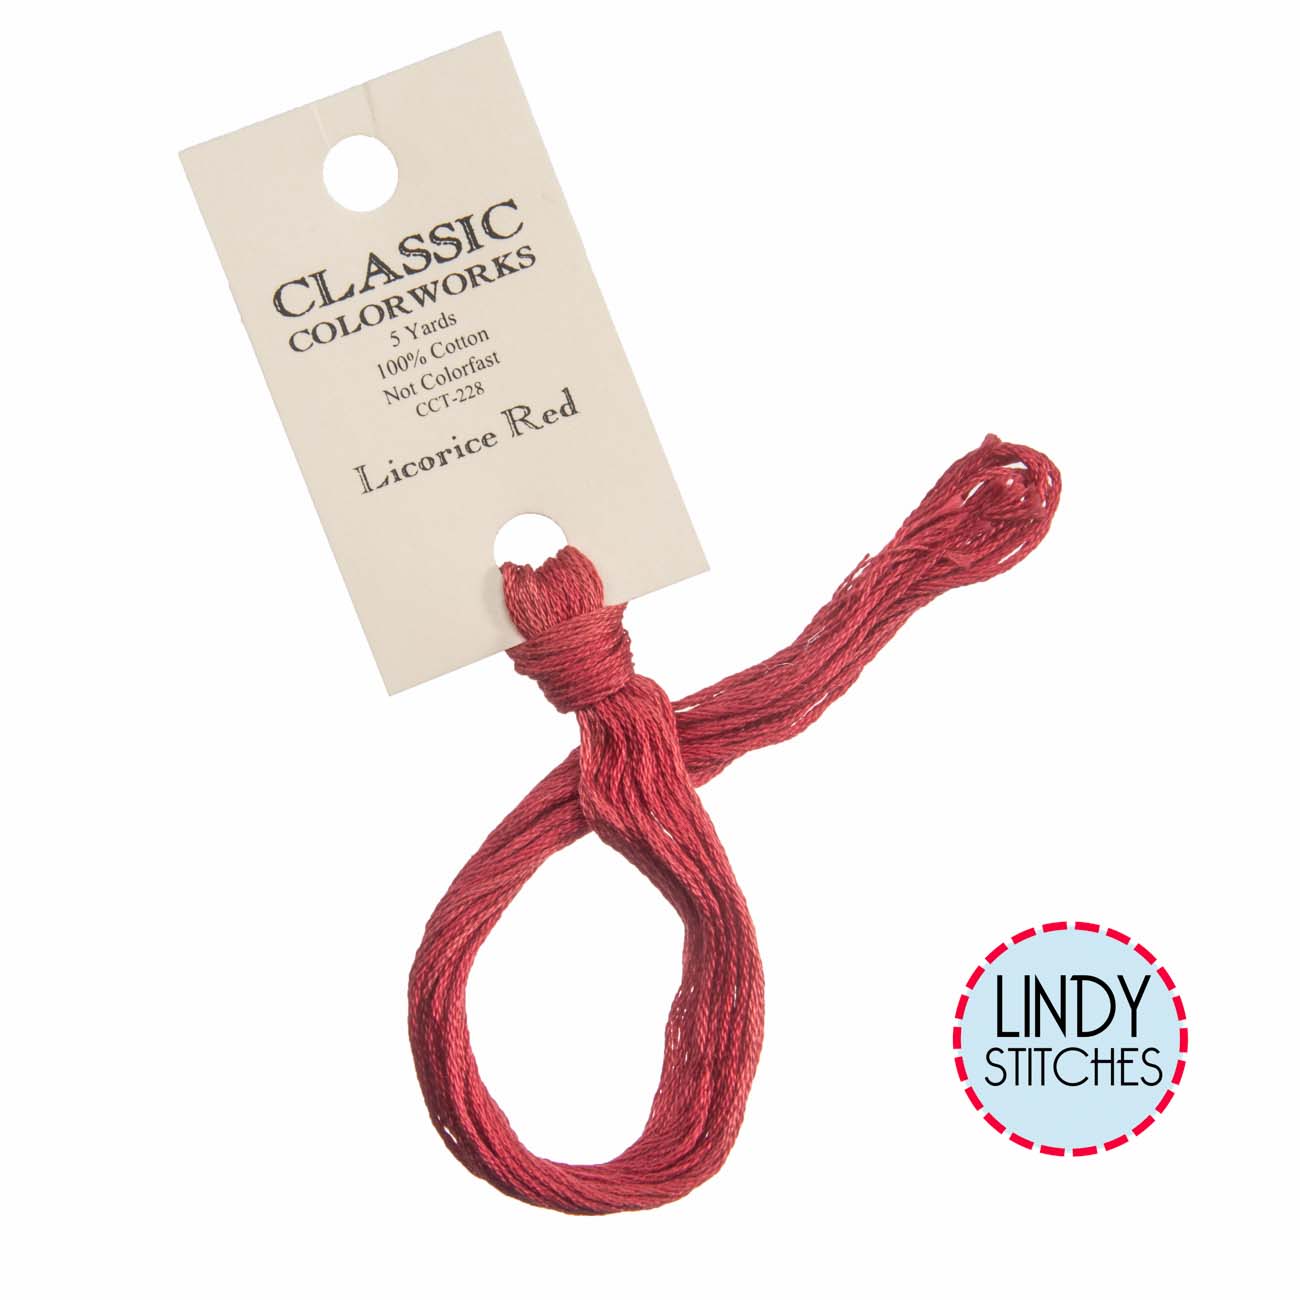 Licorice Red Classic Colorworks Floss Hand Dyed Cotton Skein